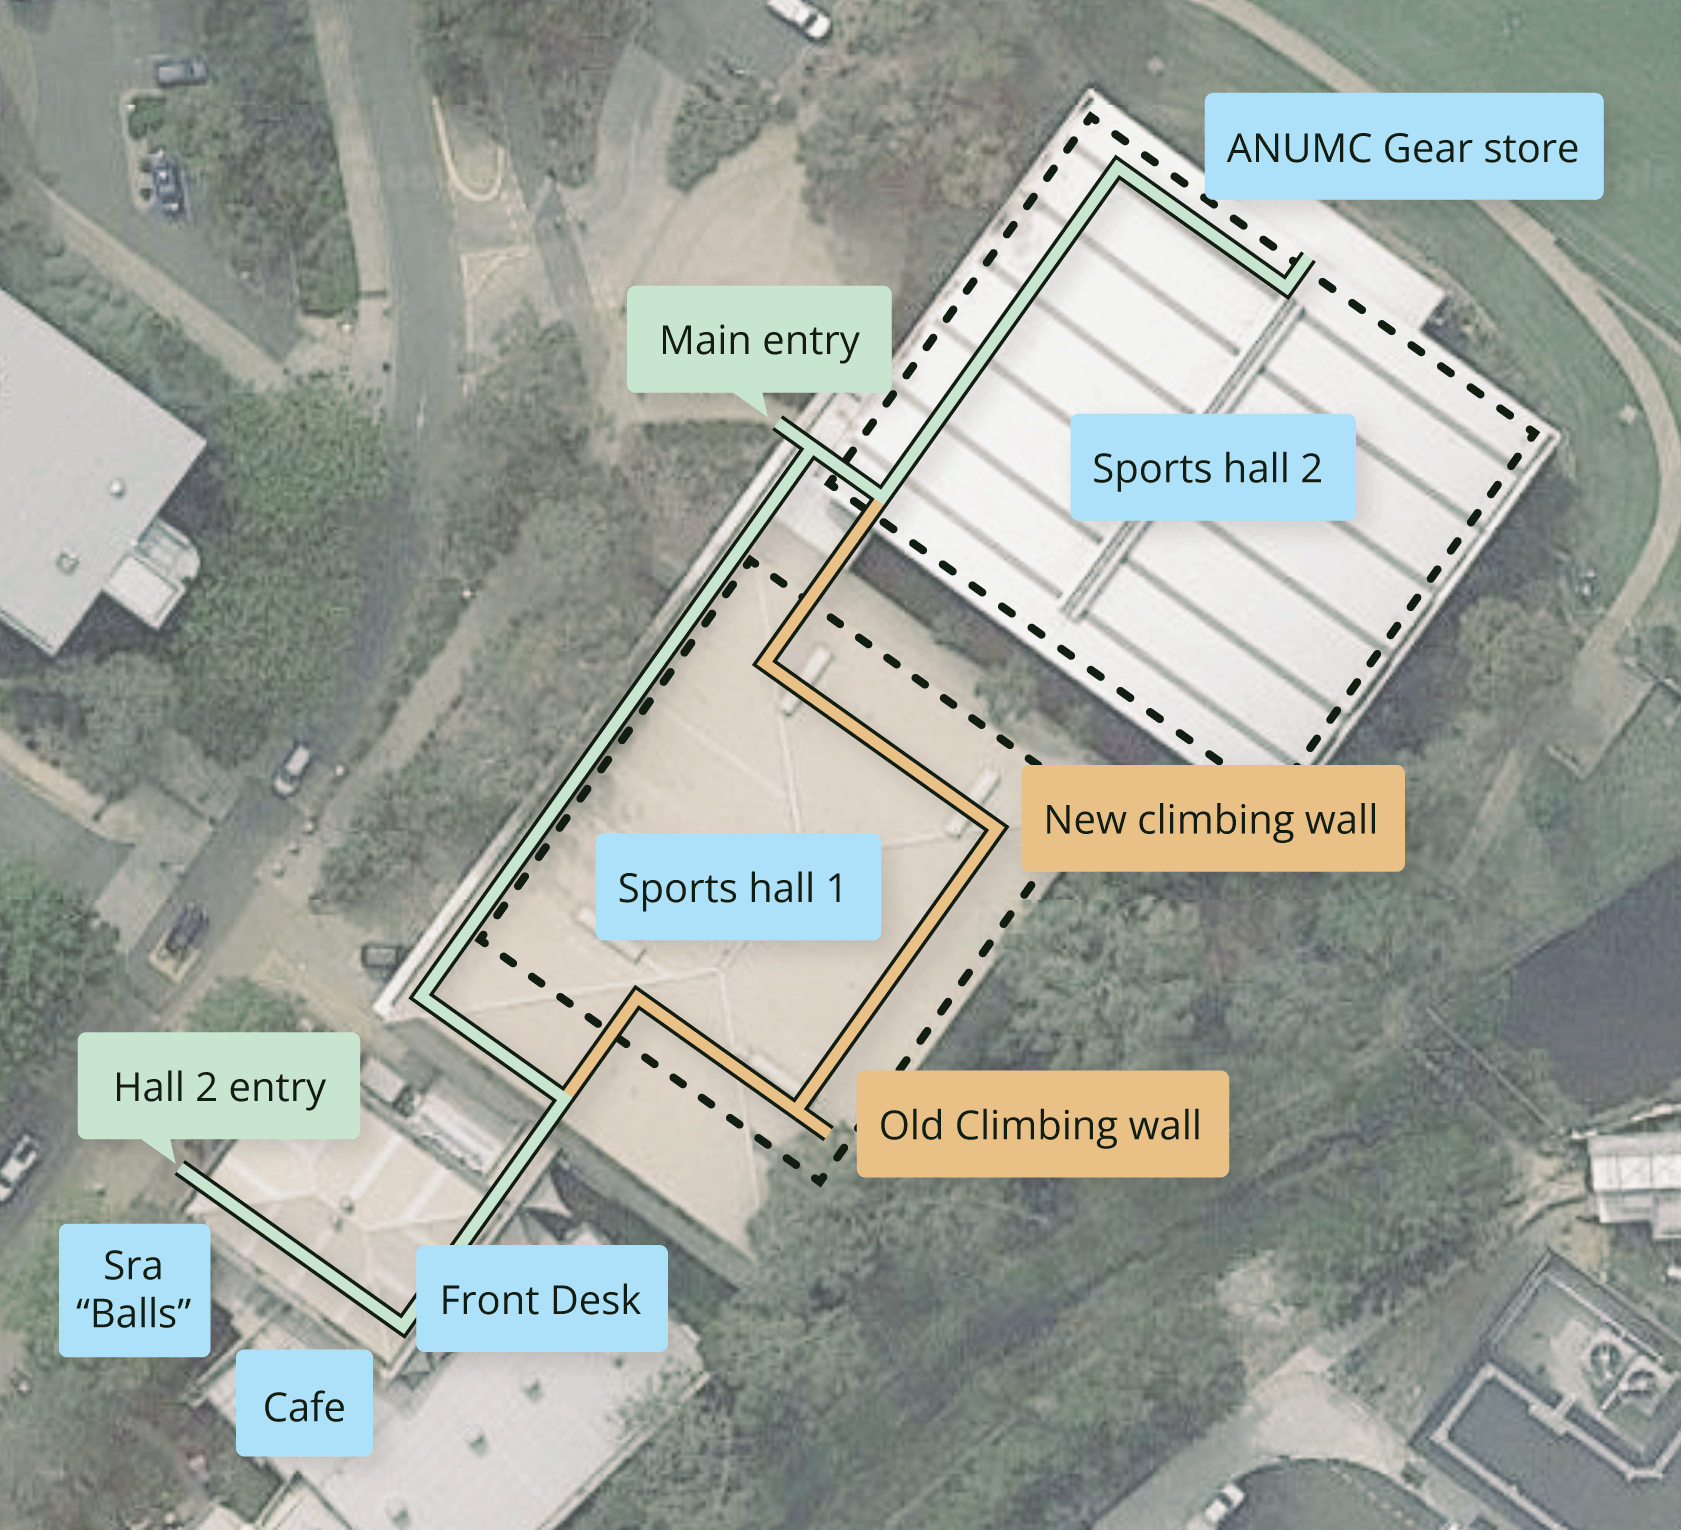 Map shows the route to the gear store through the sports hall. Note the gear store is not wheelchair accessible due to its location in the loft of a storage area up stairs. 